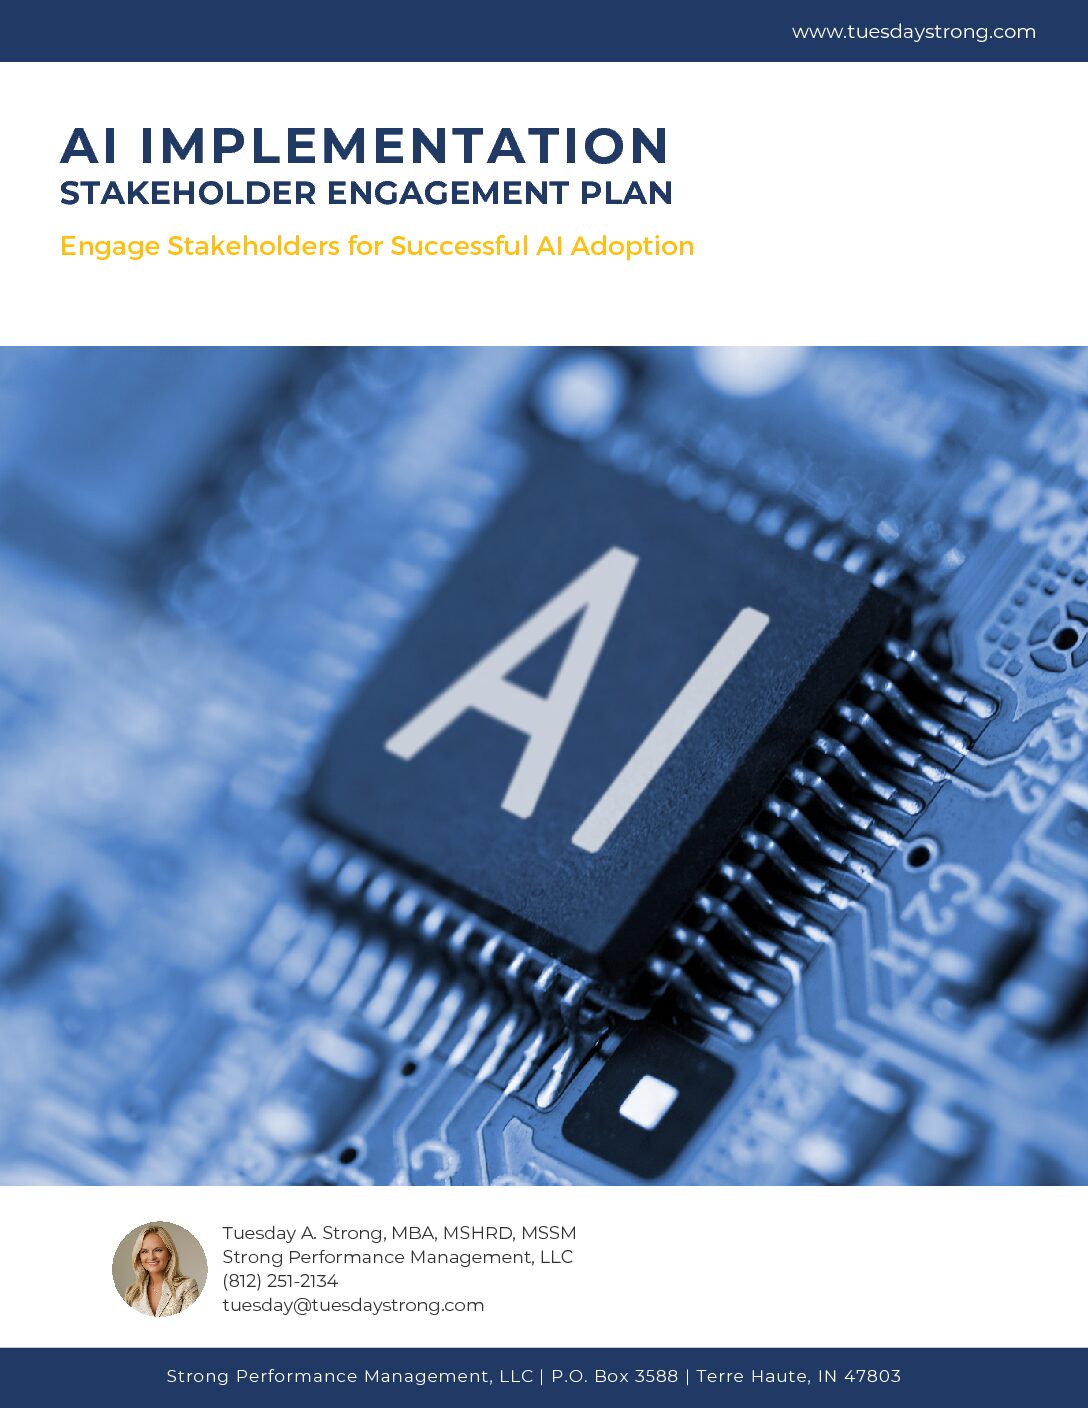 AI Implementation - Stakeholder Engagement Plan: Guide and Template